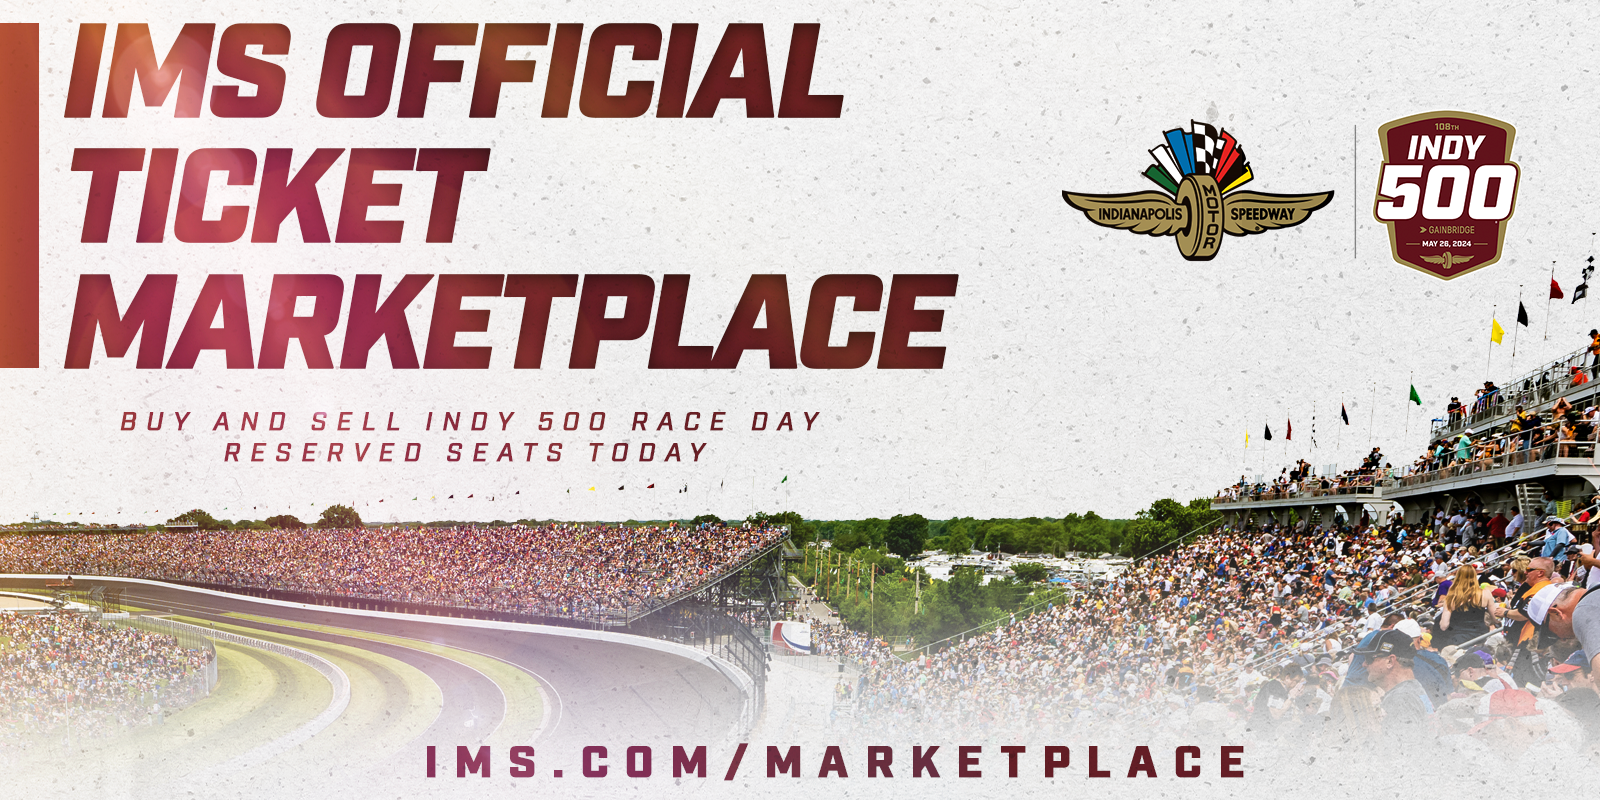 IMS Official Ticket Marketplace